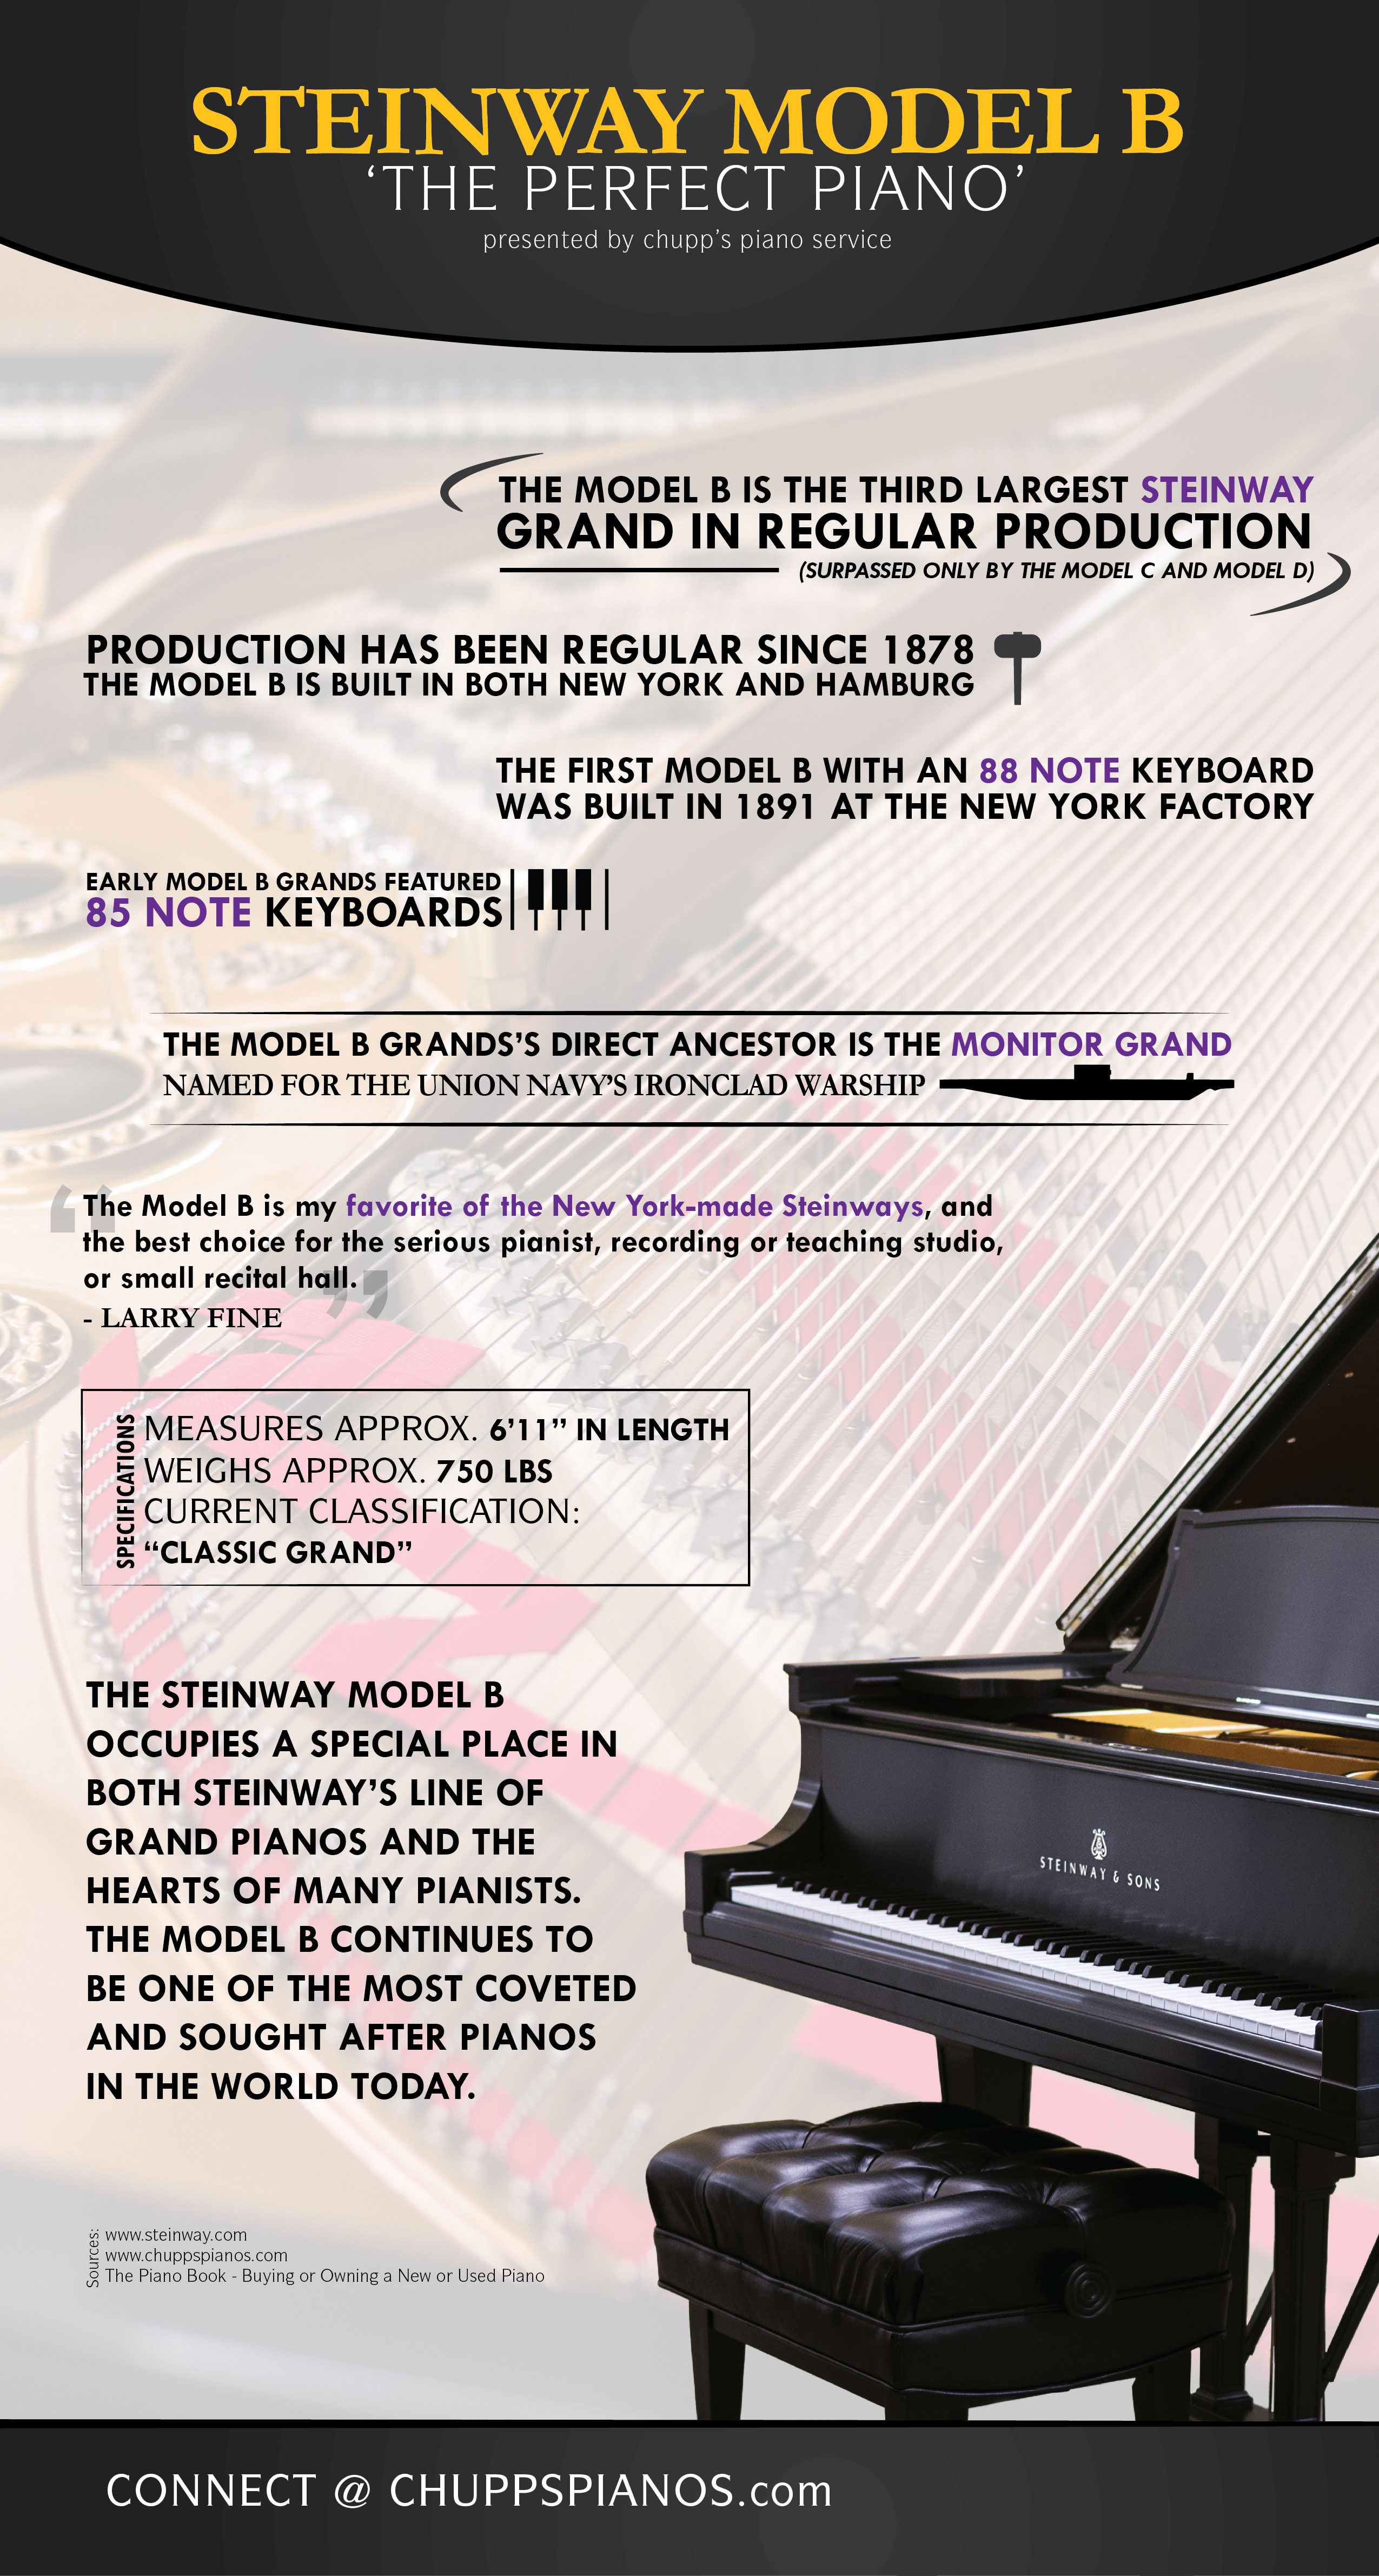 Quick Facts about Steinway Model B Grand Pianos